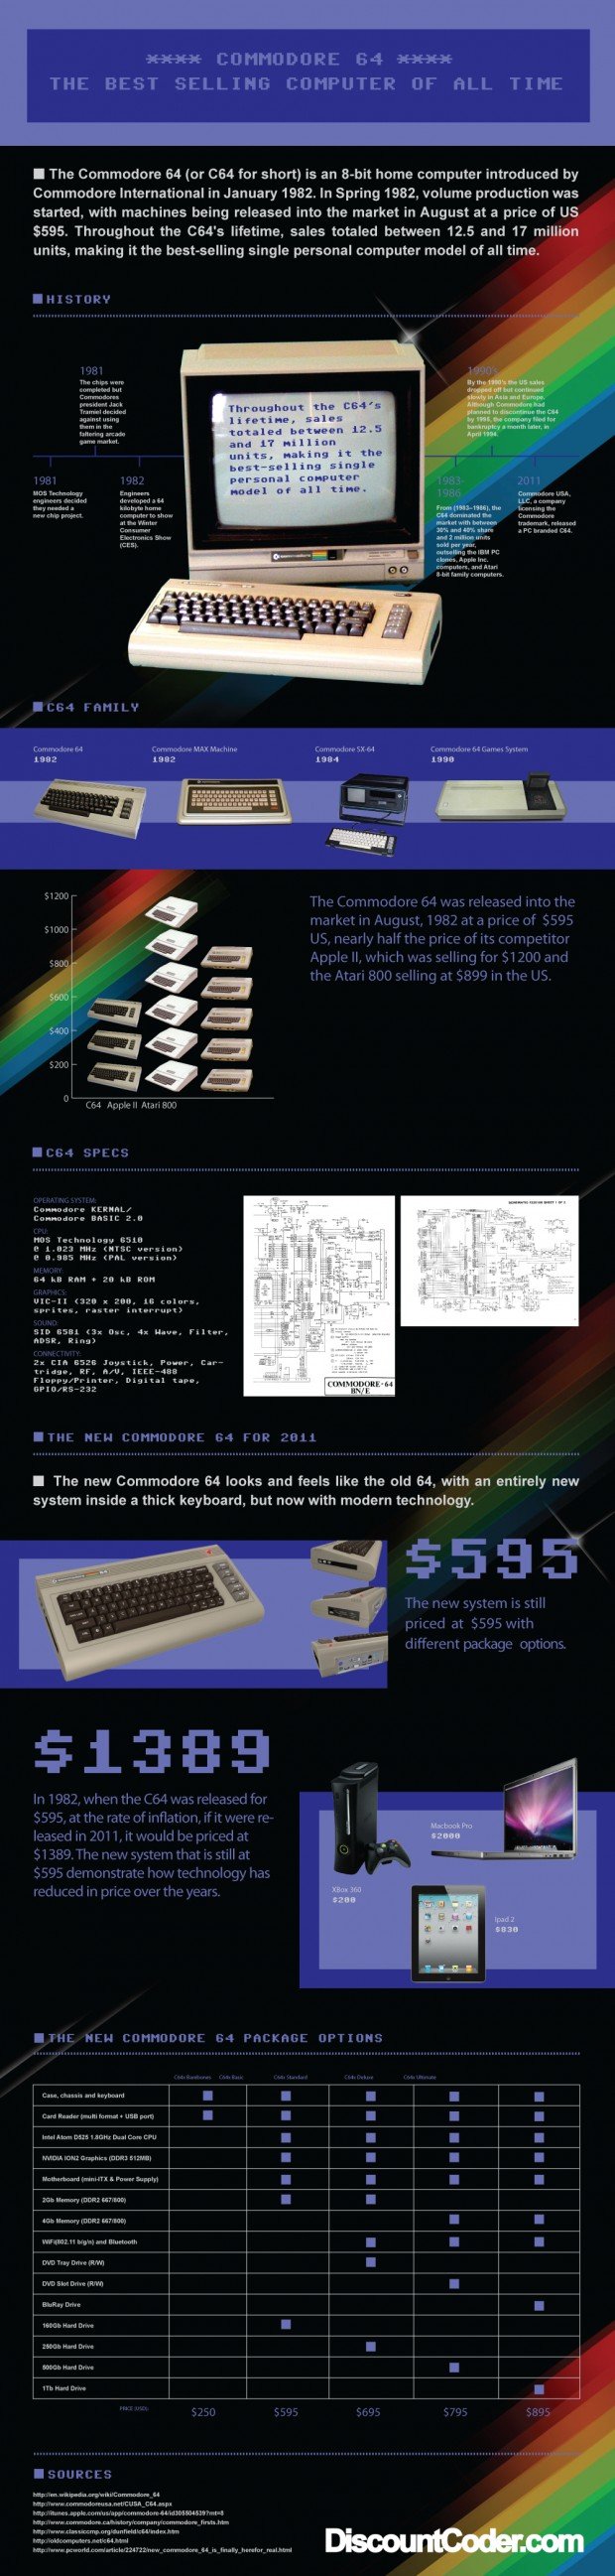 commodore 64 history timeline